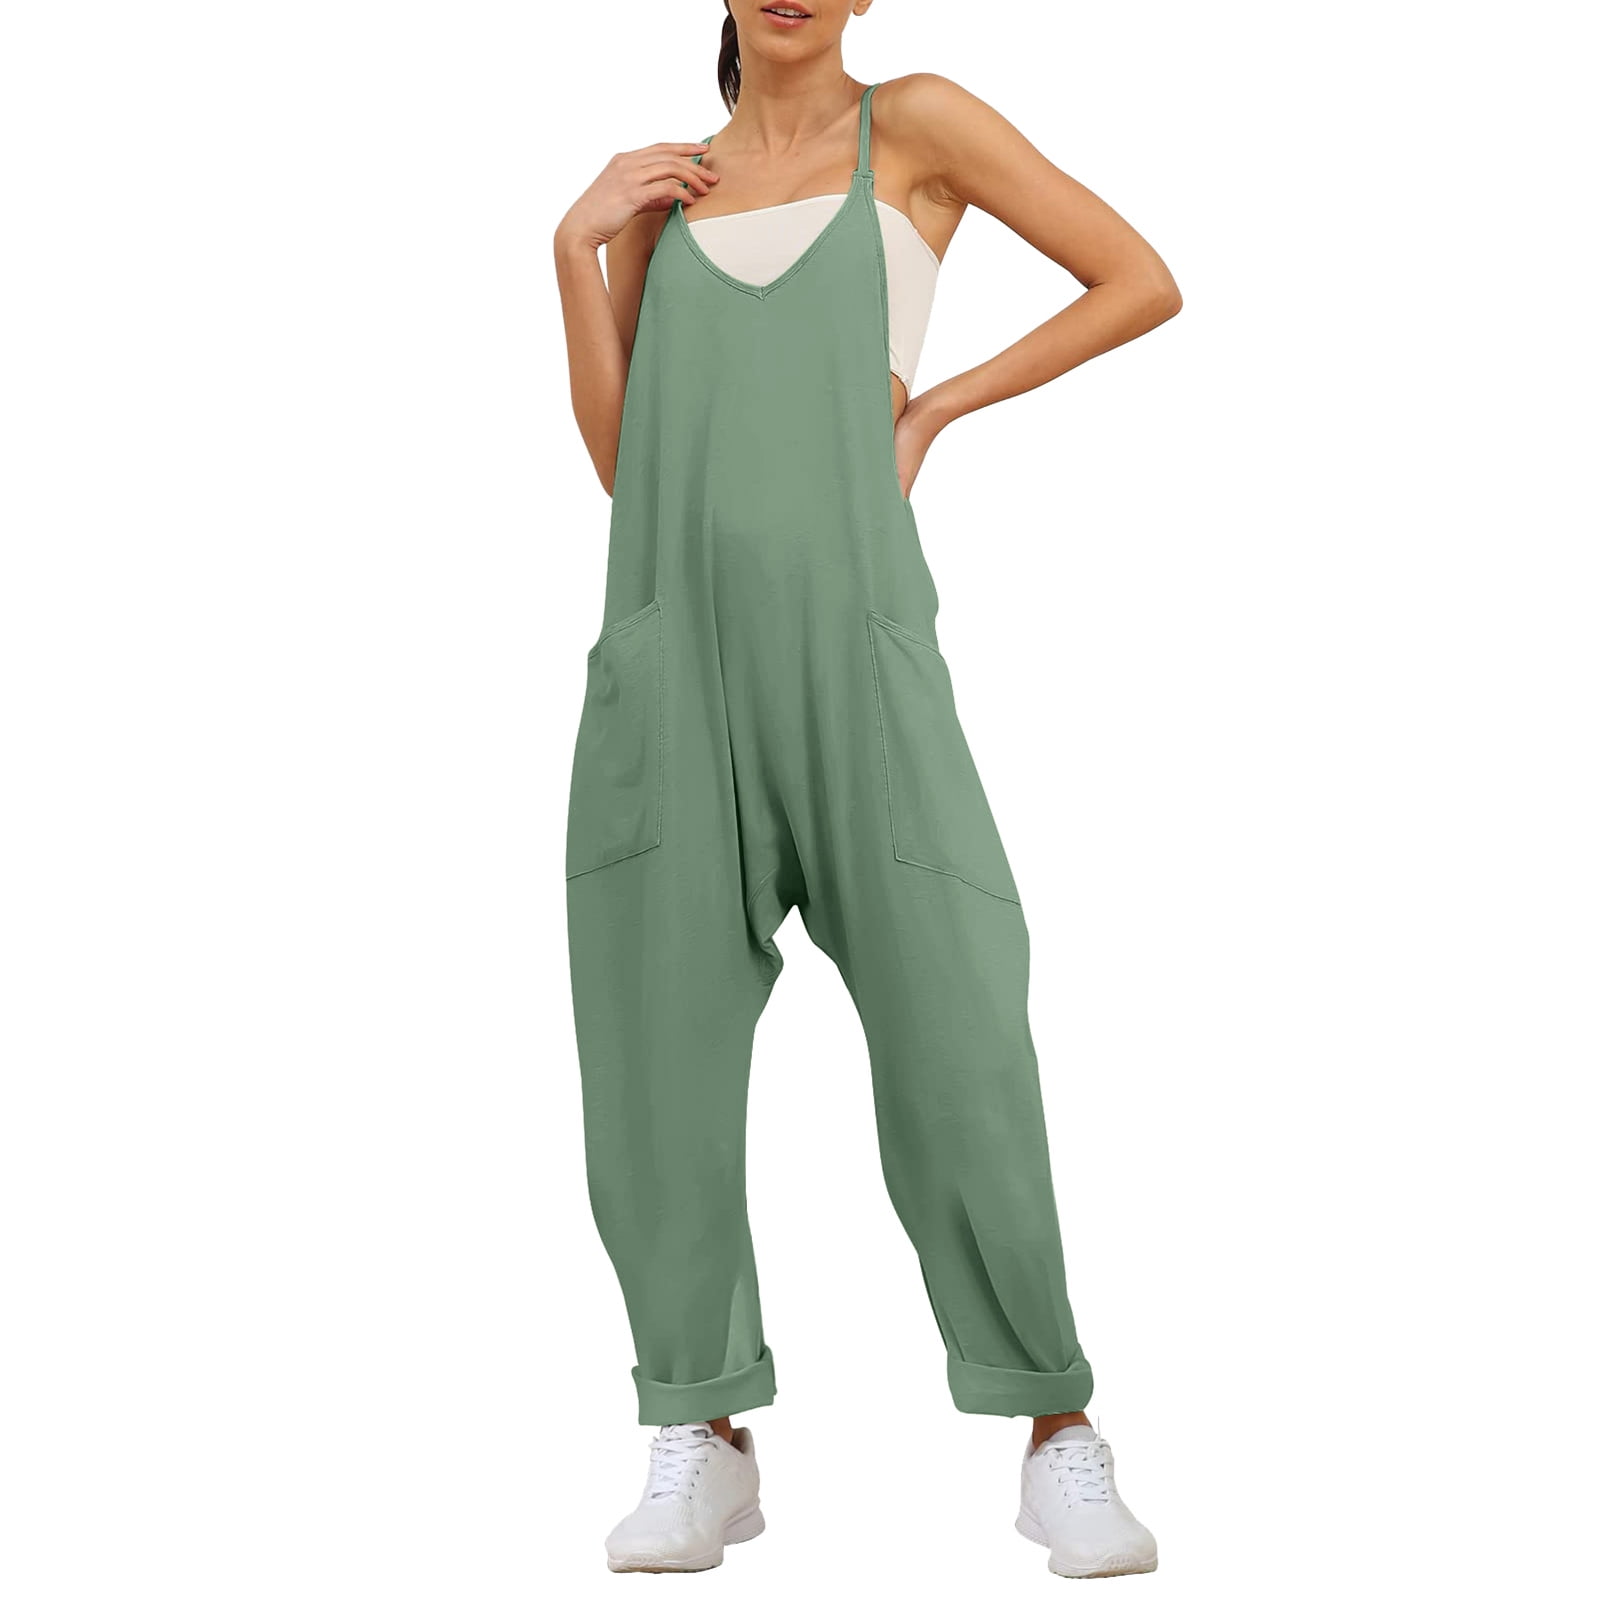 FRXSWW Ladies Cute Loose Jumpsuit Wide Leg Pants Bottons Sleeveless Boho Casual  Summer Jumpsuits With Pocket Green L 